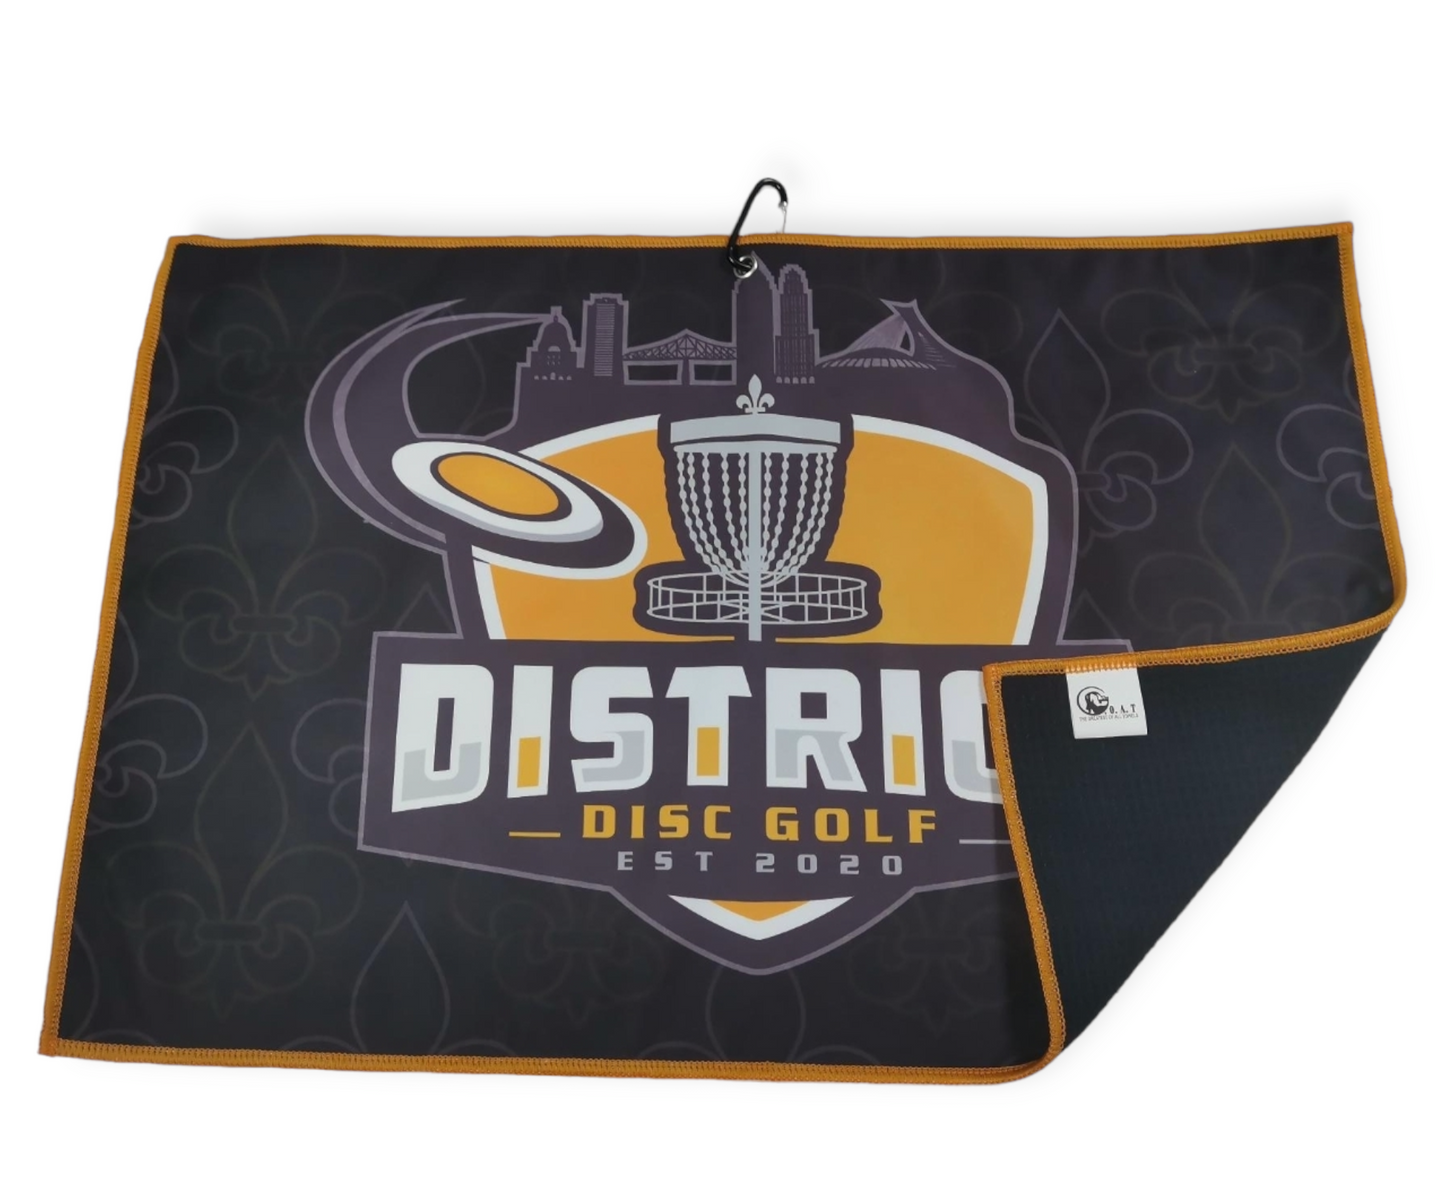 District Disc golf / The G.O.A.T towel